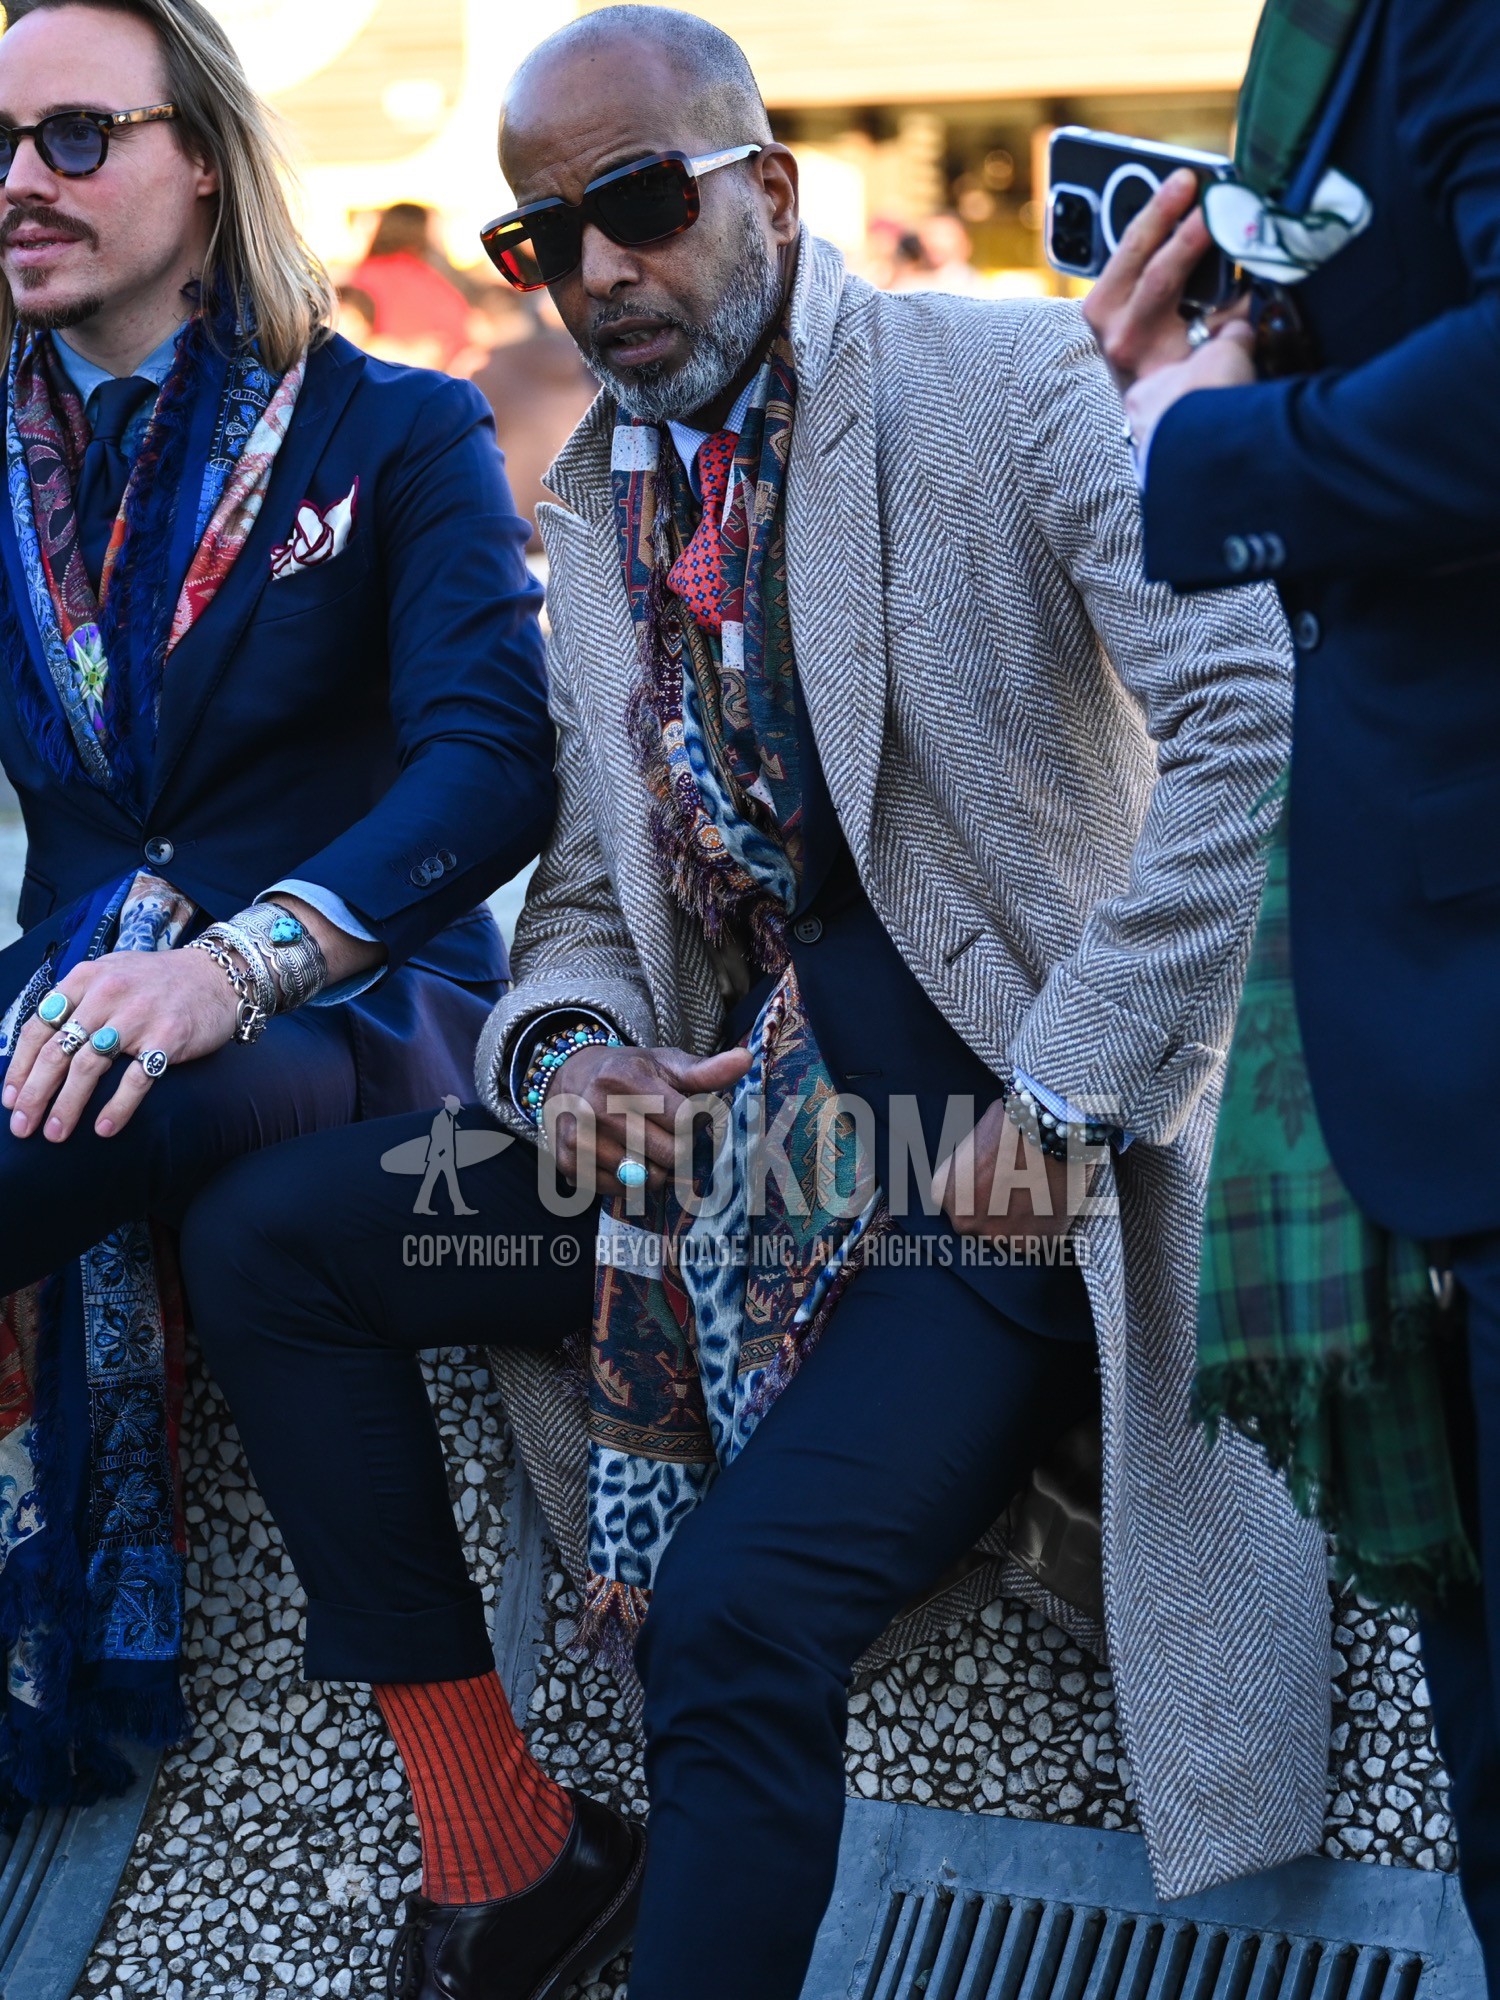 Men's autumn winter outfit with brown tortoiseshell sunglasses, multi-color green red navy yellow graphic bandana/neckerchief, beige brown herringbone ulster coat, white plain shirt, red stripes socks, black plain toe leather shoes, navy plain suit, red small crest necktie.